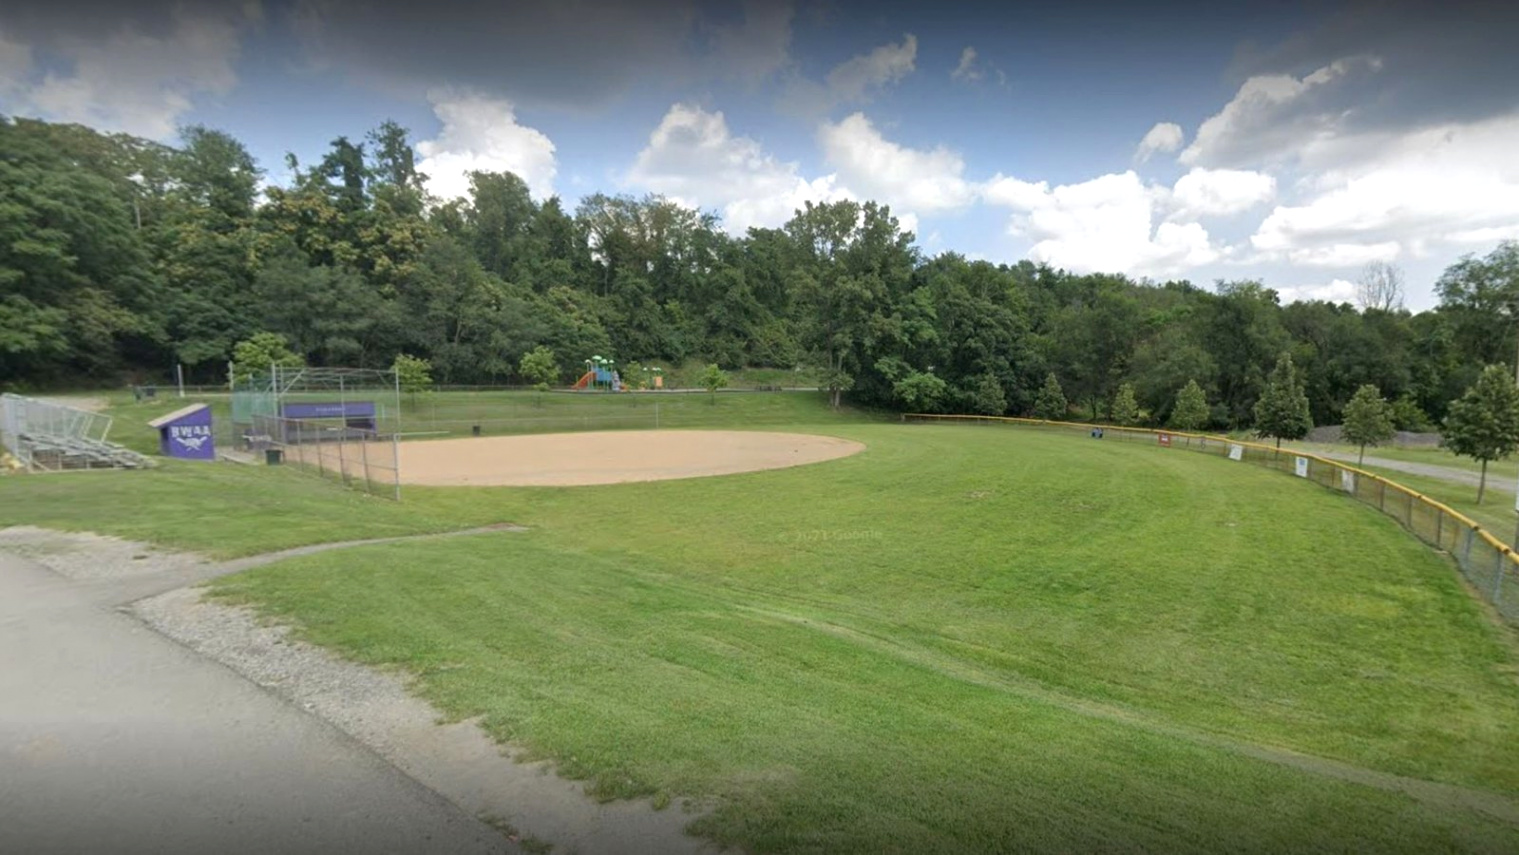 Personil Injury Lawyer In Lake In Dans Petition Â· Save Whitehall Borough Baseball Field Â· Change.org